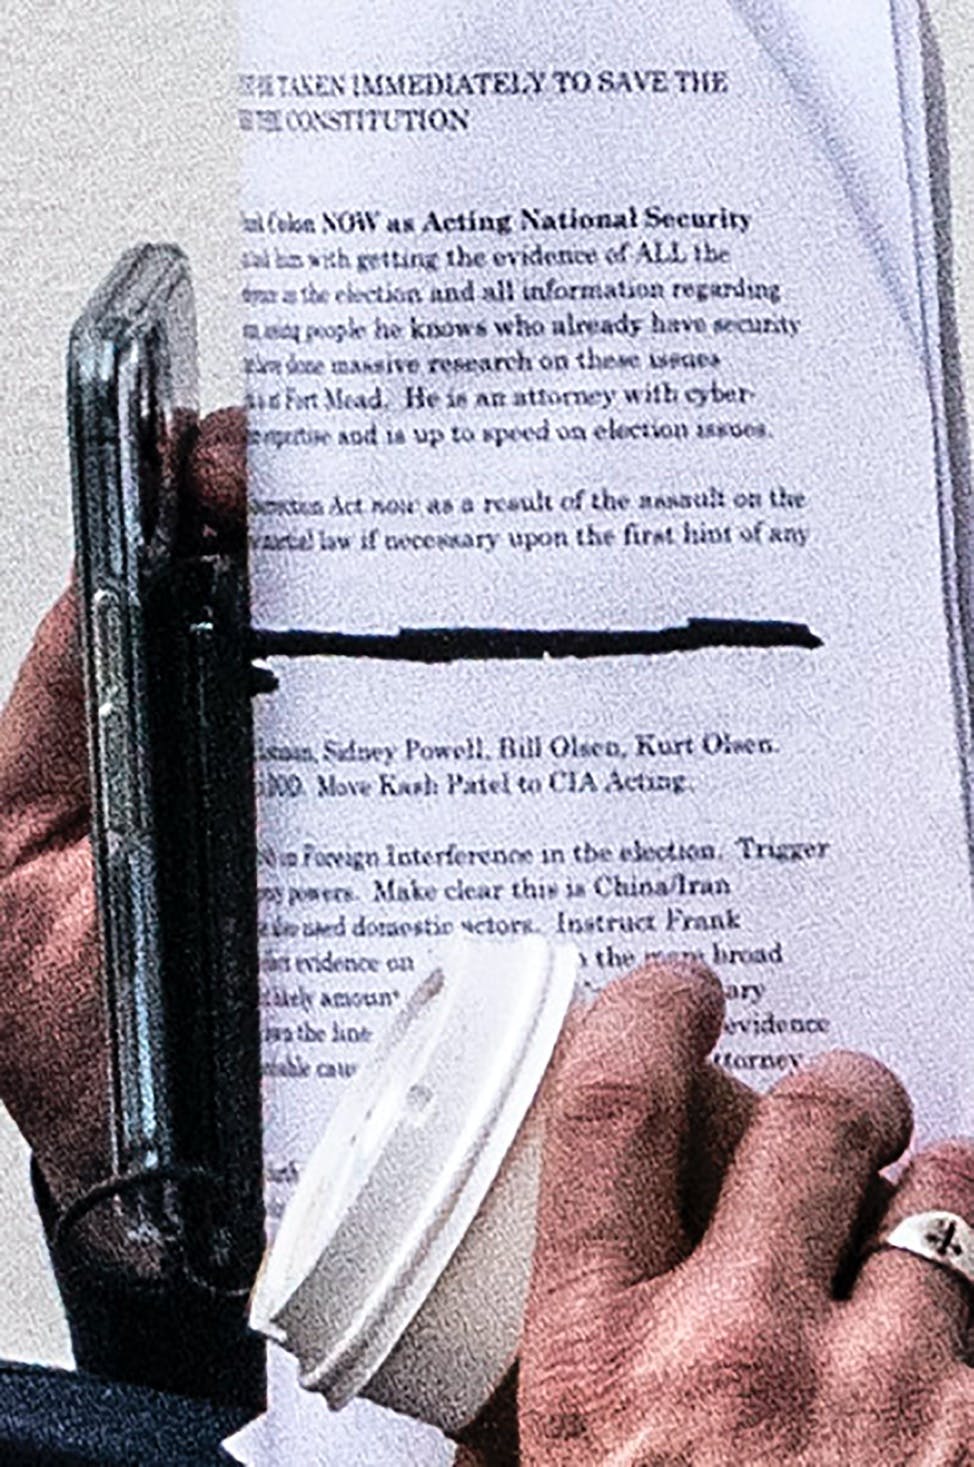 Lindell met Jan. 15 with Trump to share what he claimed was new evidence of election hacking. Spotted in his notes was “martial law if necessary,” as seen above the black line.